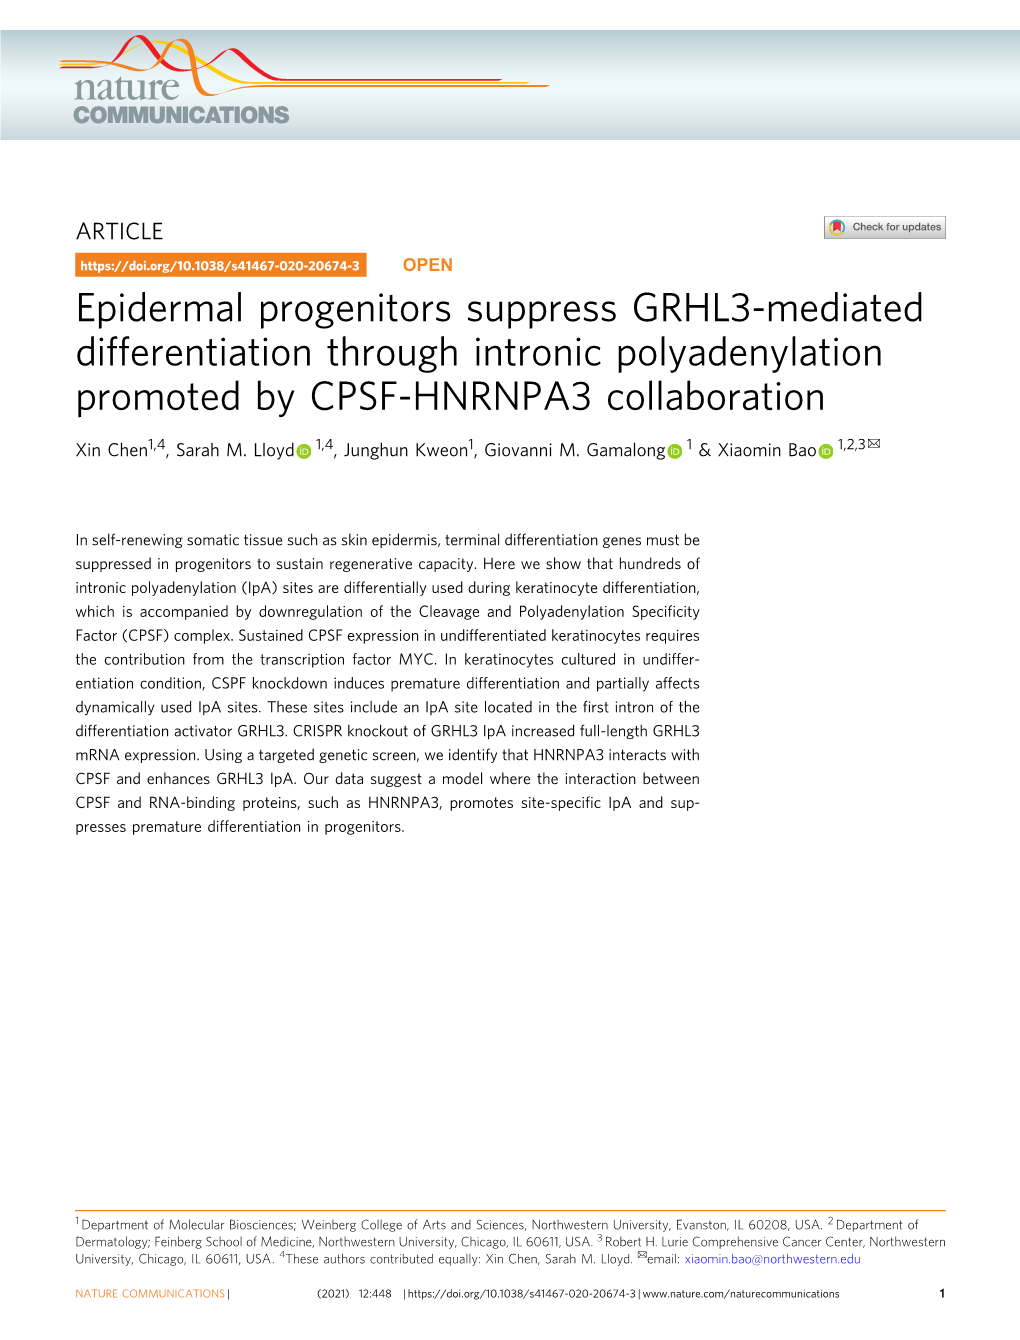 Epidermal Progenitors Suppress GRHL3-Mediated Differentiation Through Intronic Polyadenylation Promoted by CPSF-HNRNPA3 Collaboration ✉ Xin Chen1,4, Sarah M